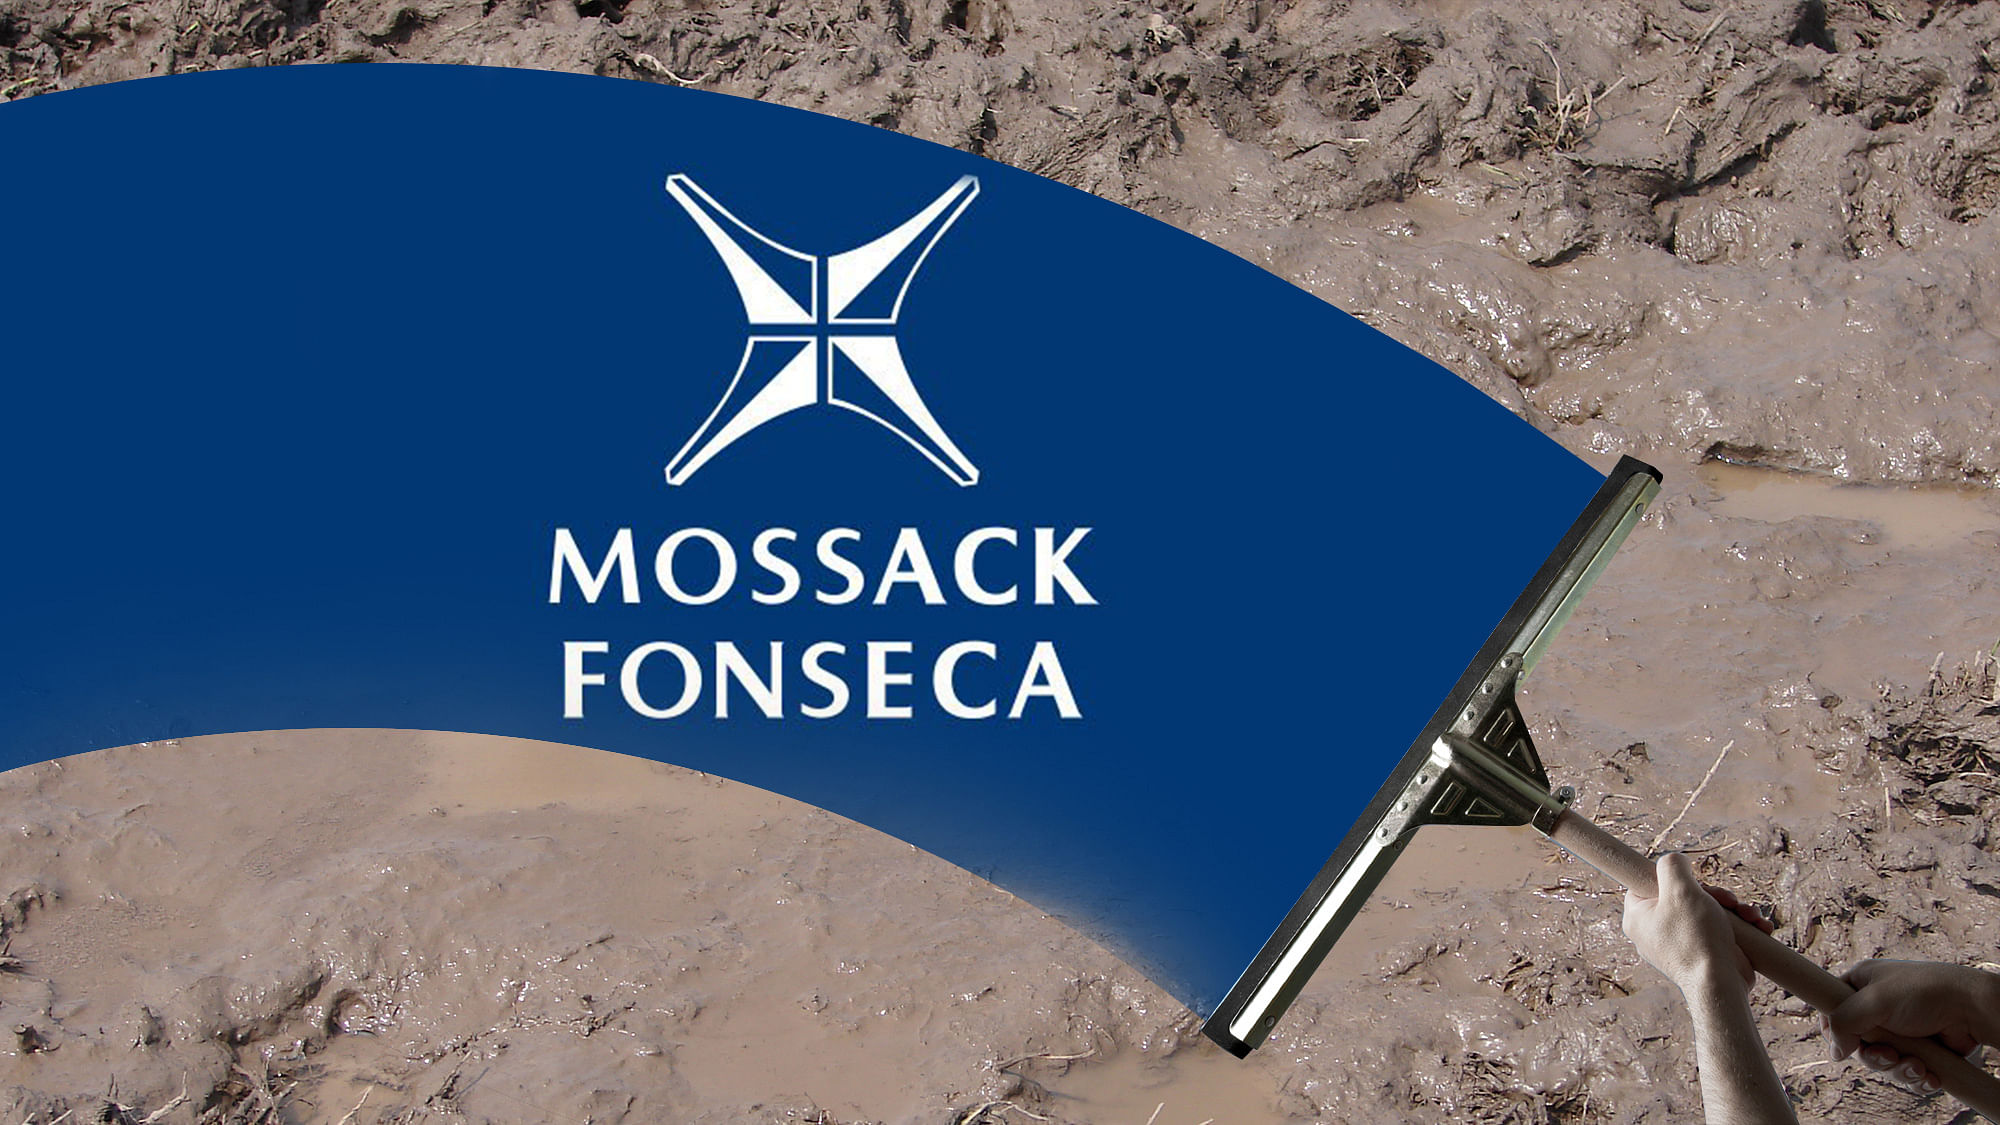 Mossack Fonseca, the firm named in the Panama paper leaks has denied association with most of the names mentioned in the papers.&nbsp;(Photo: <b>The Quint</b>)